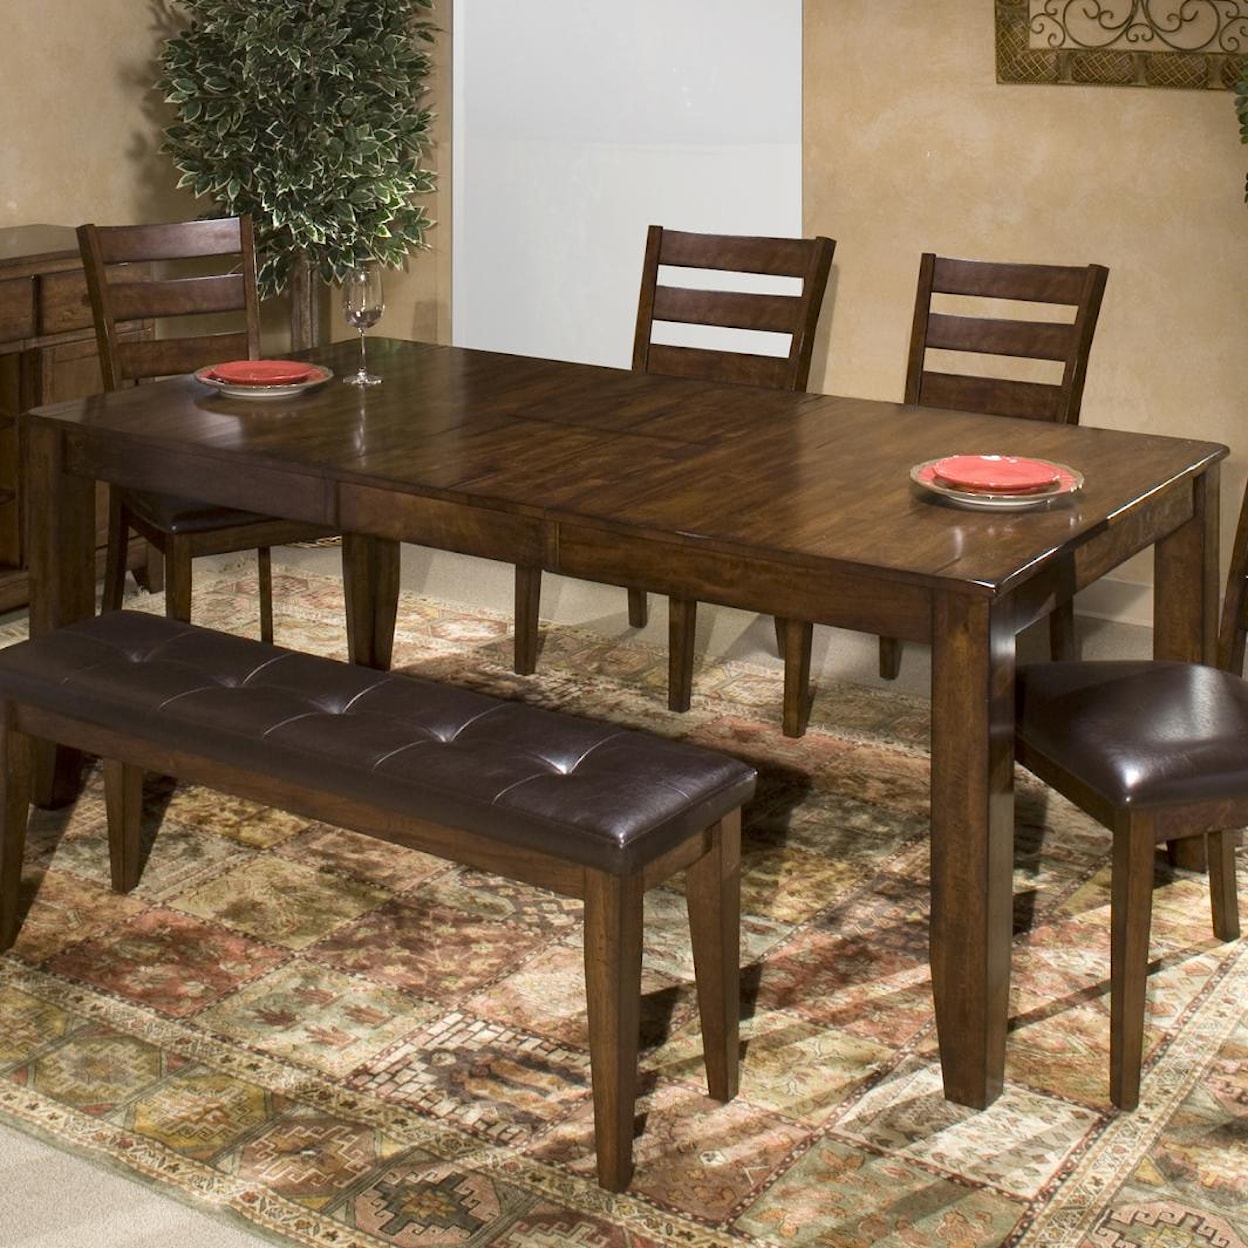 Intercon 13215 Dining Table with Butterfly Leaf